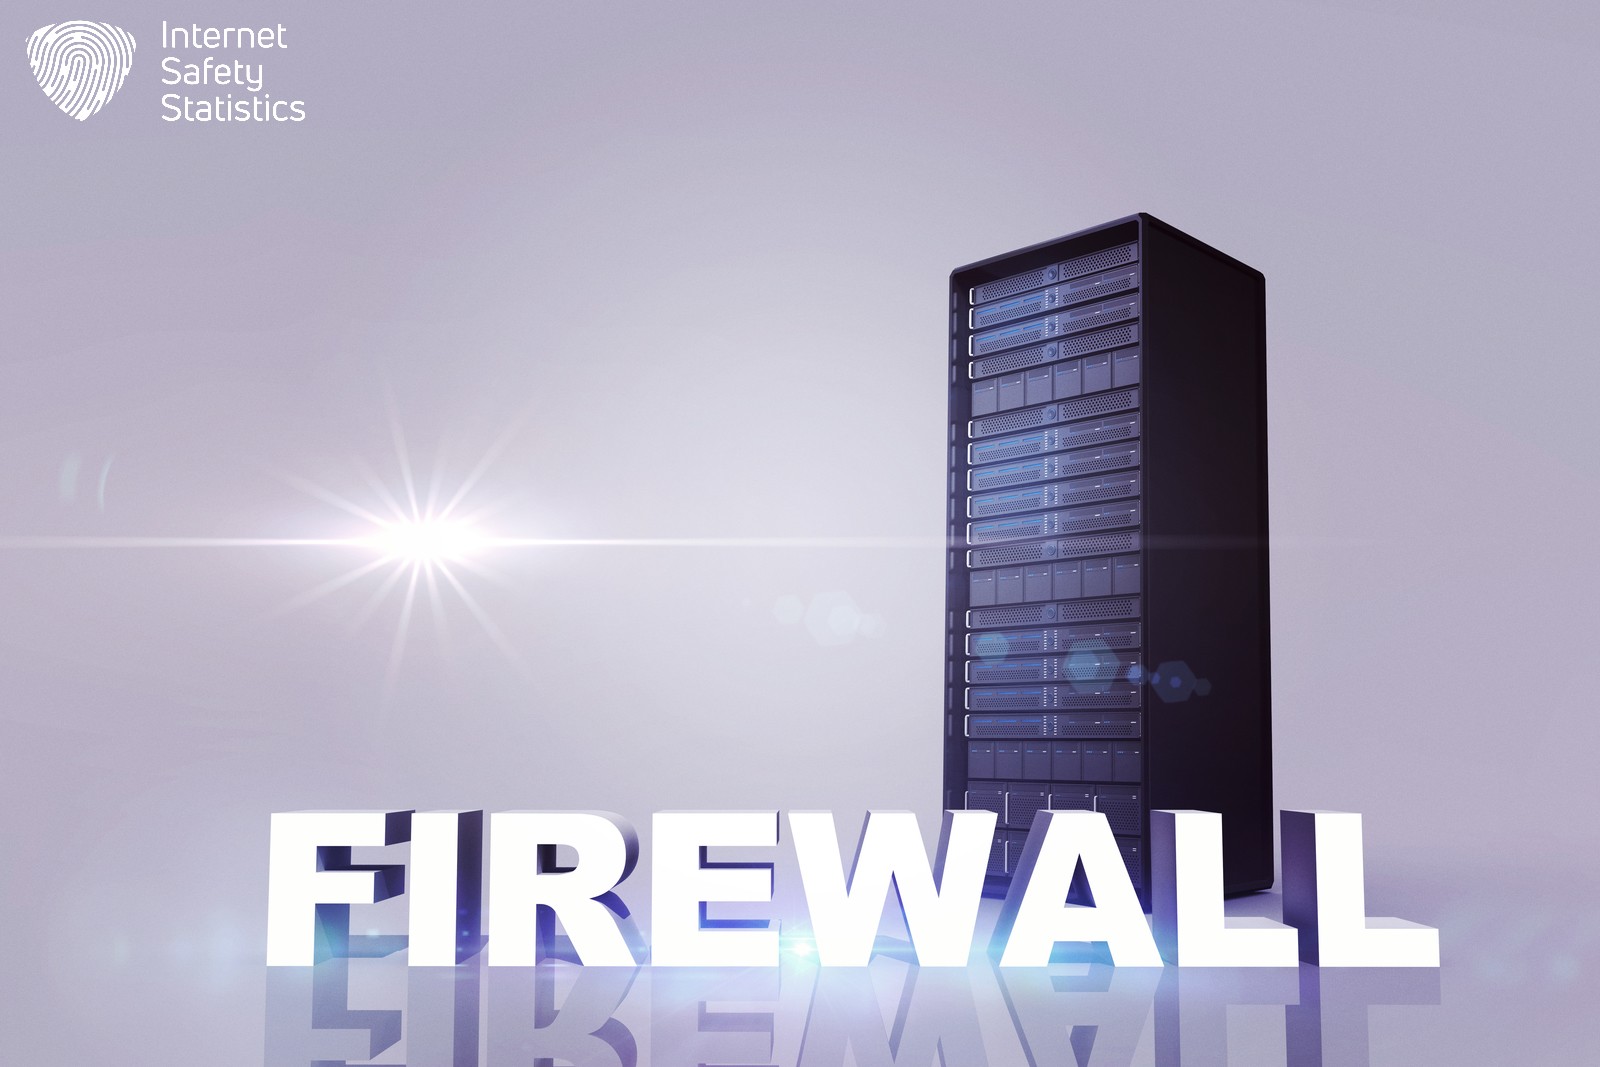 Sophos XG Firewall Home Edition Review - Sophos XG Firewall is a software appliance